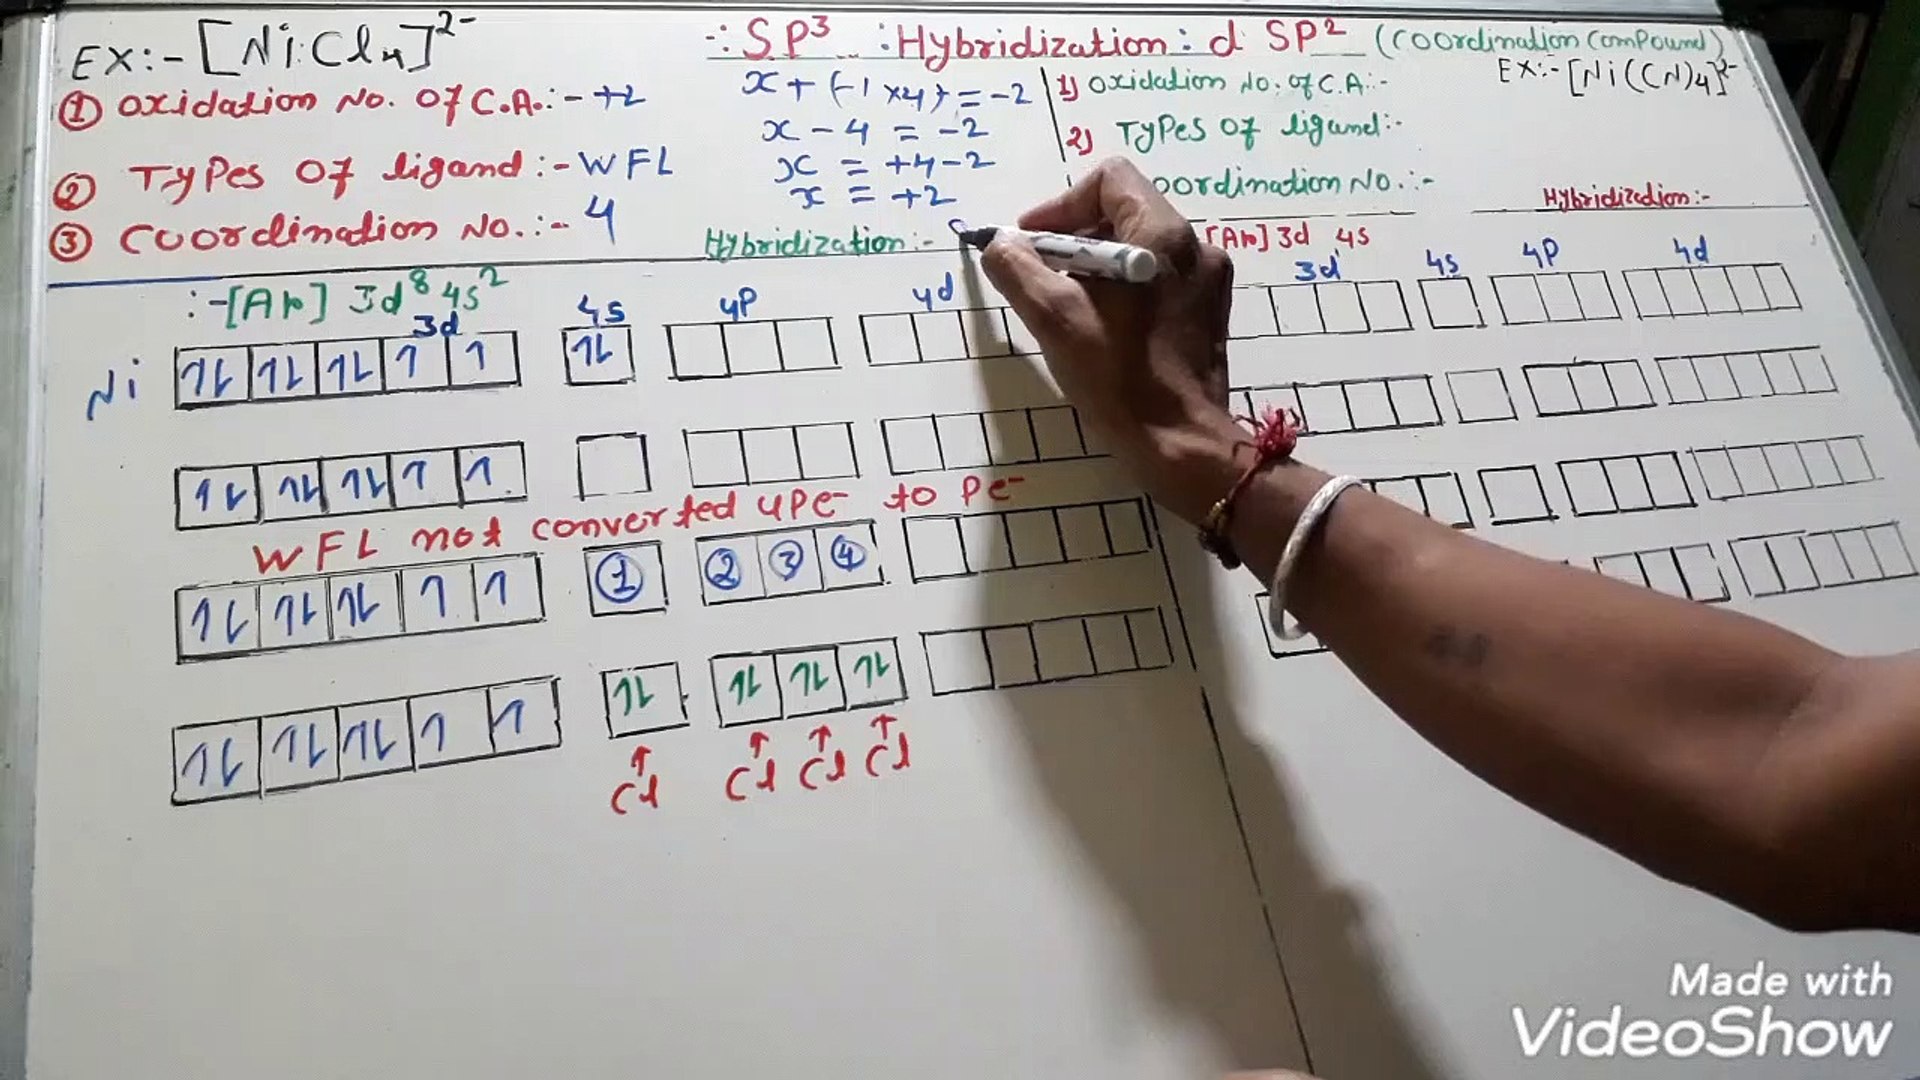 Sp3 and dsp2 hybridization in coordination compound - video Dailymotion